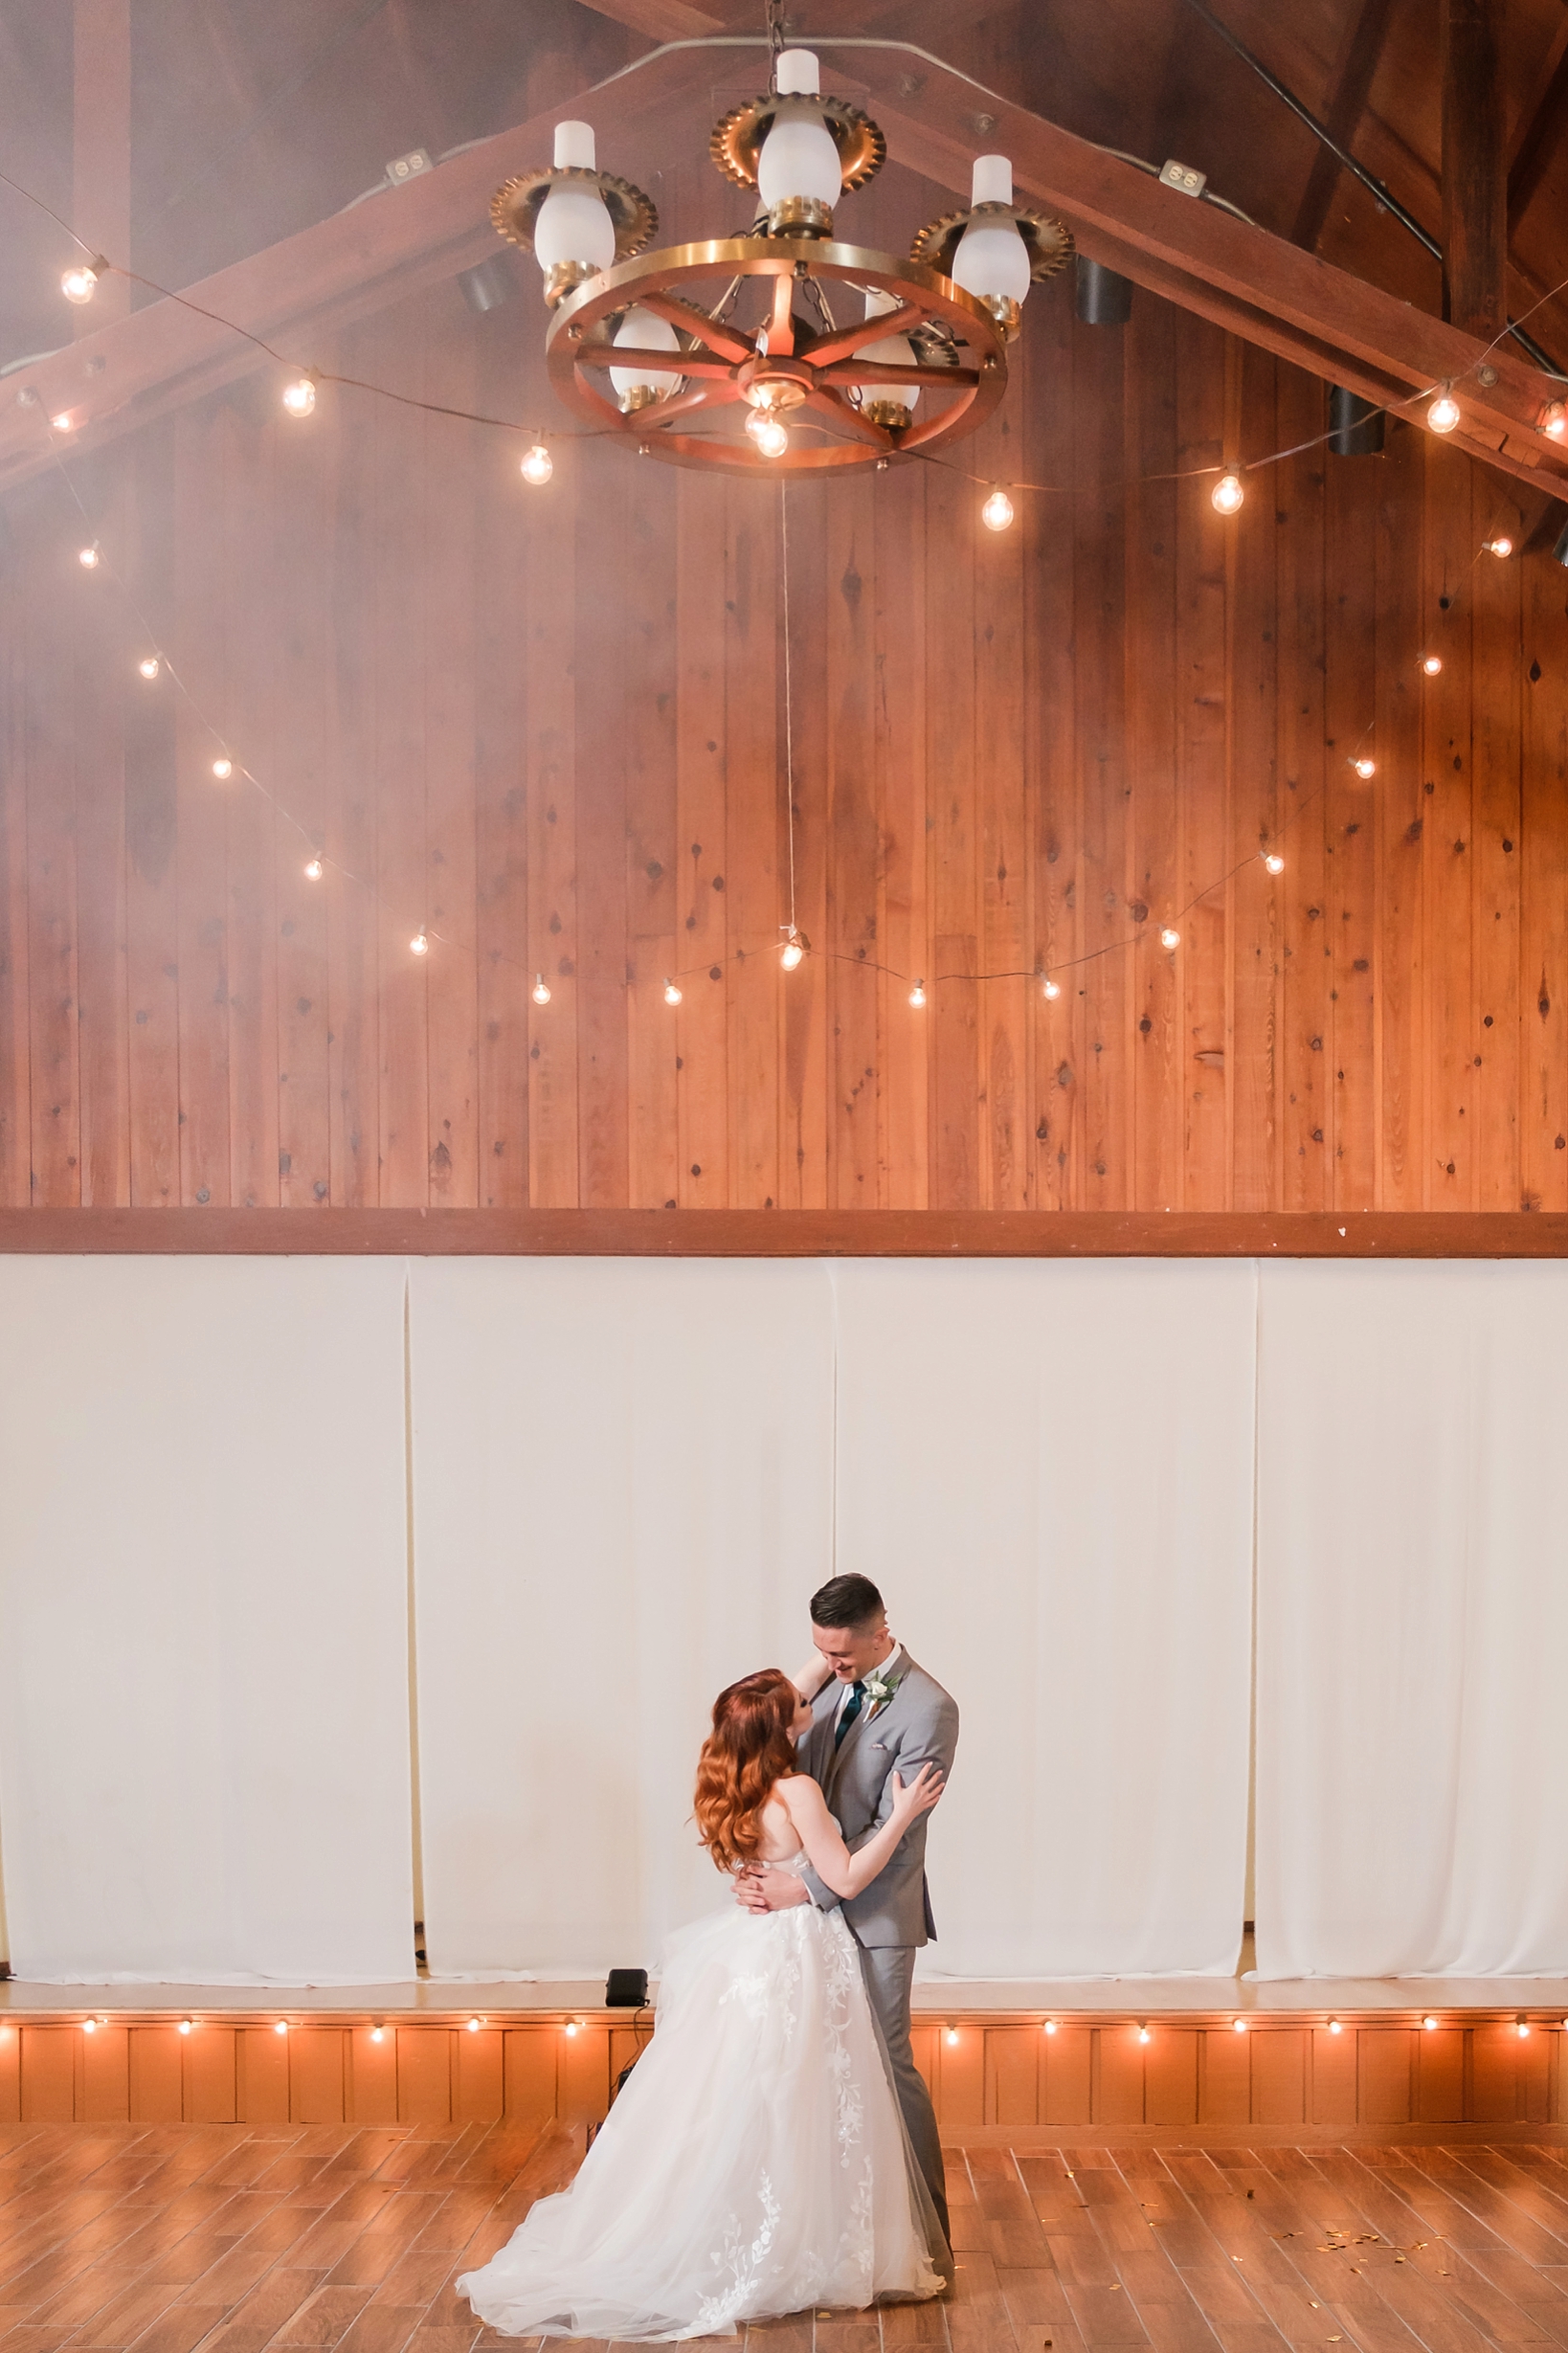 Bride and Groom sharing a first dance under a chandelier at Westgate River Resort